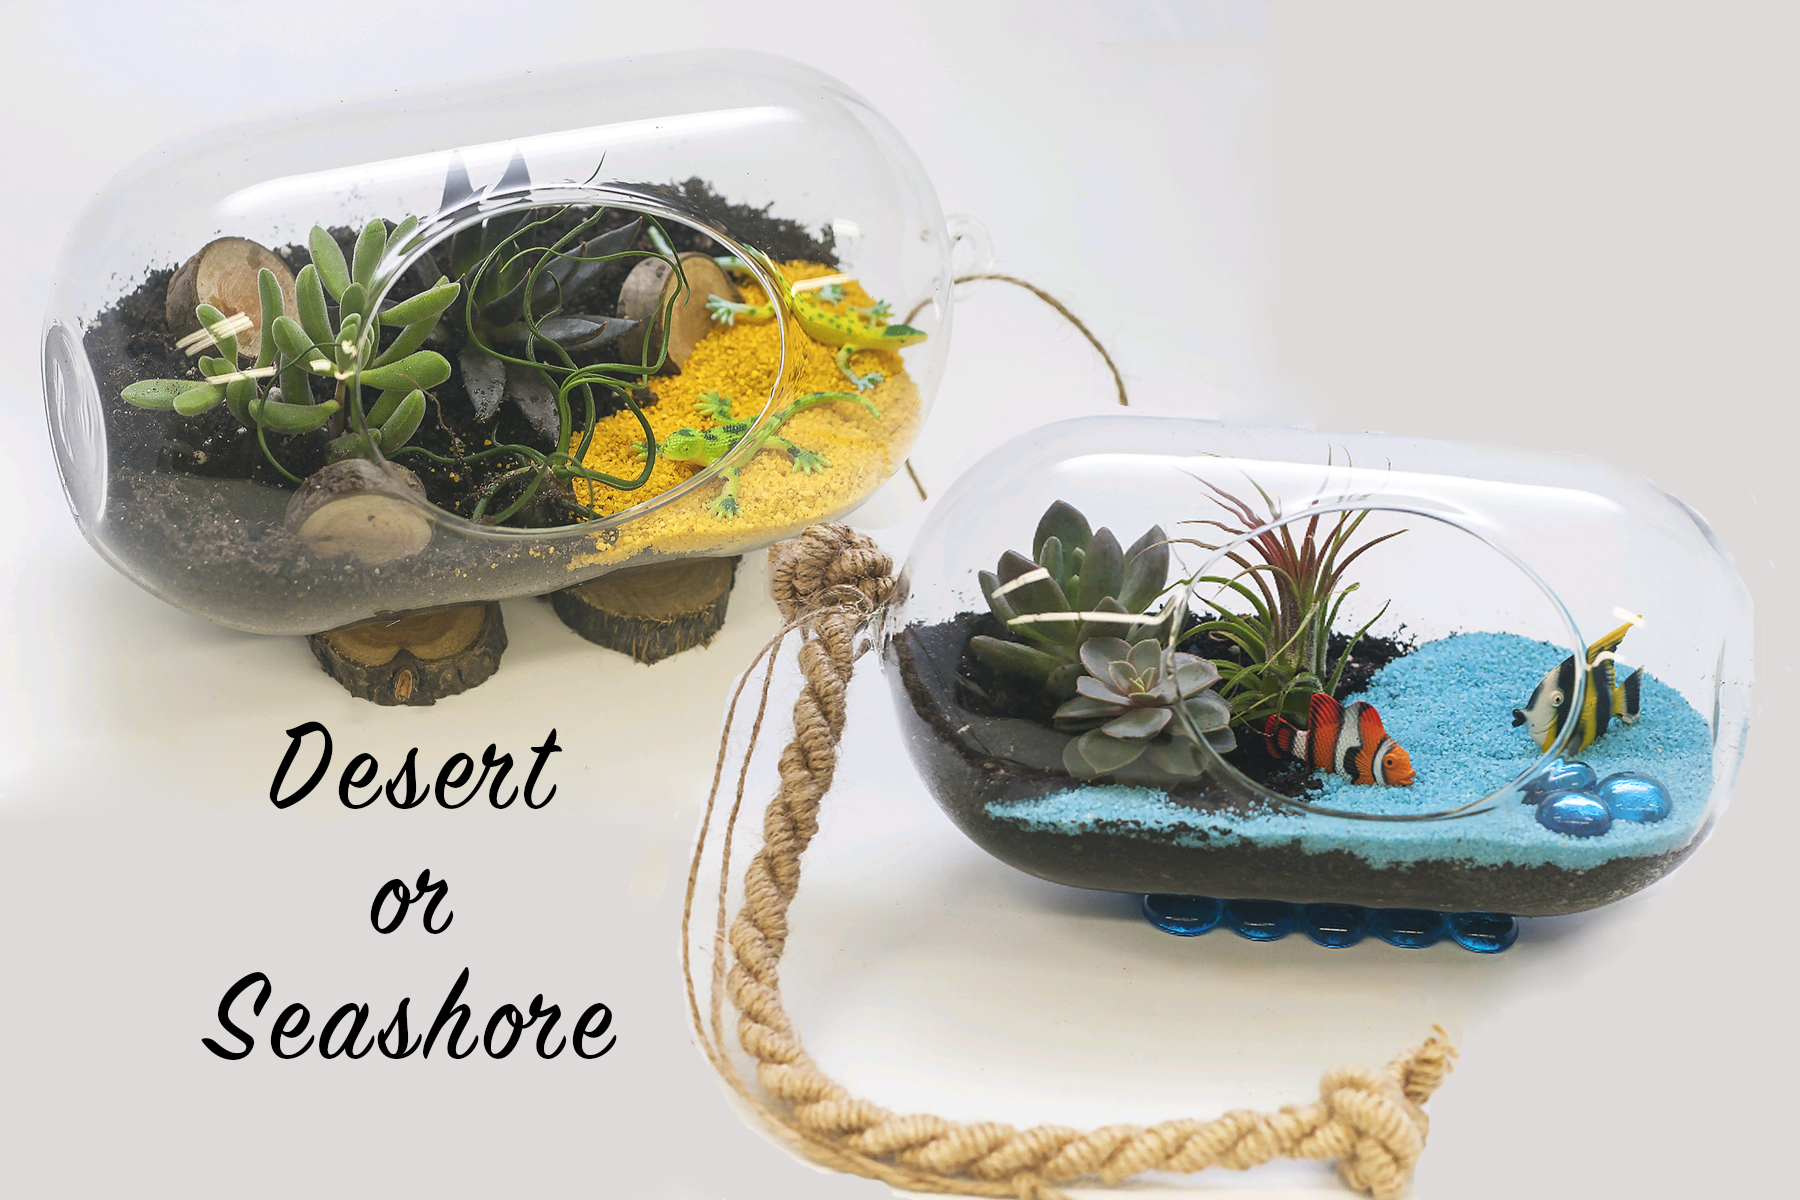 A Desert or Seashore in Orion Glass plant nite project by Yaymaker